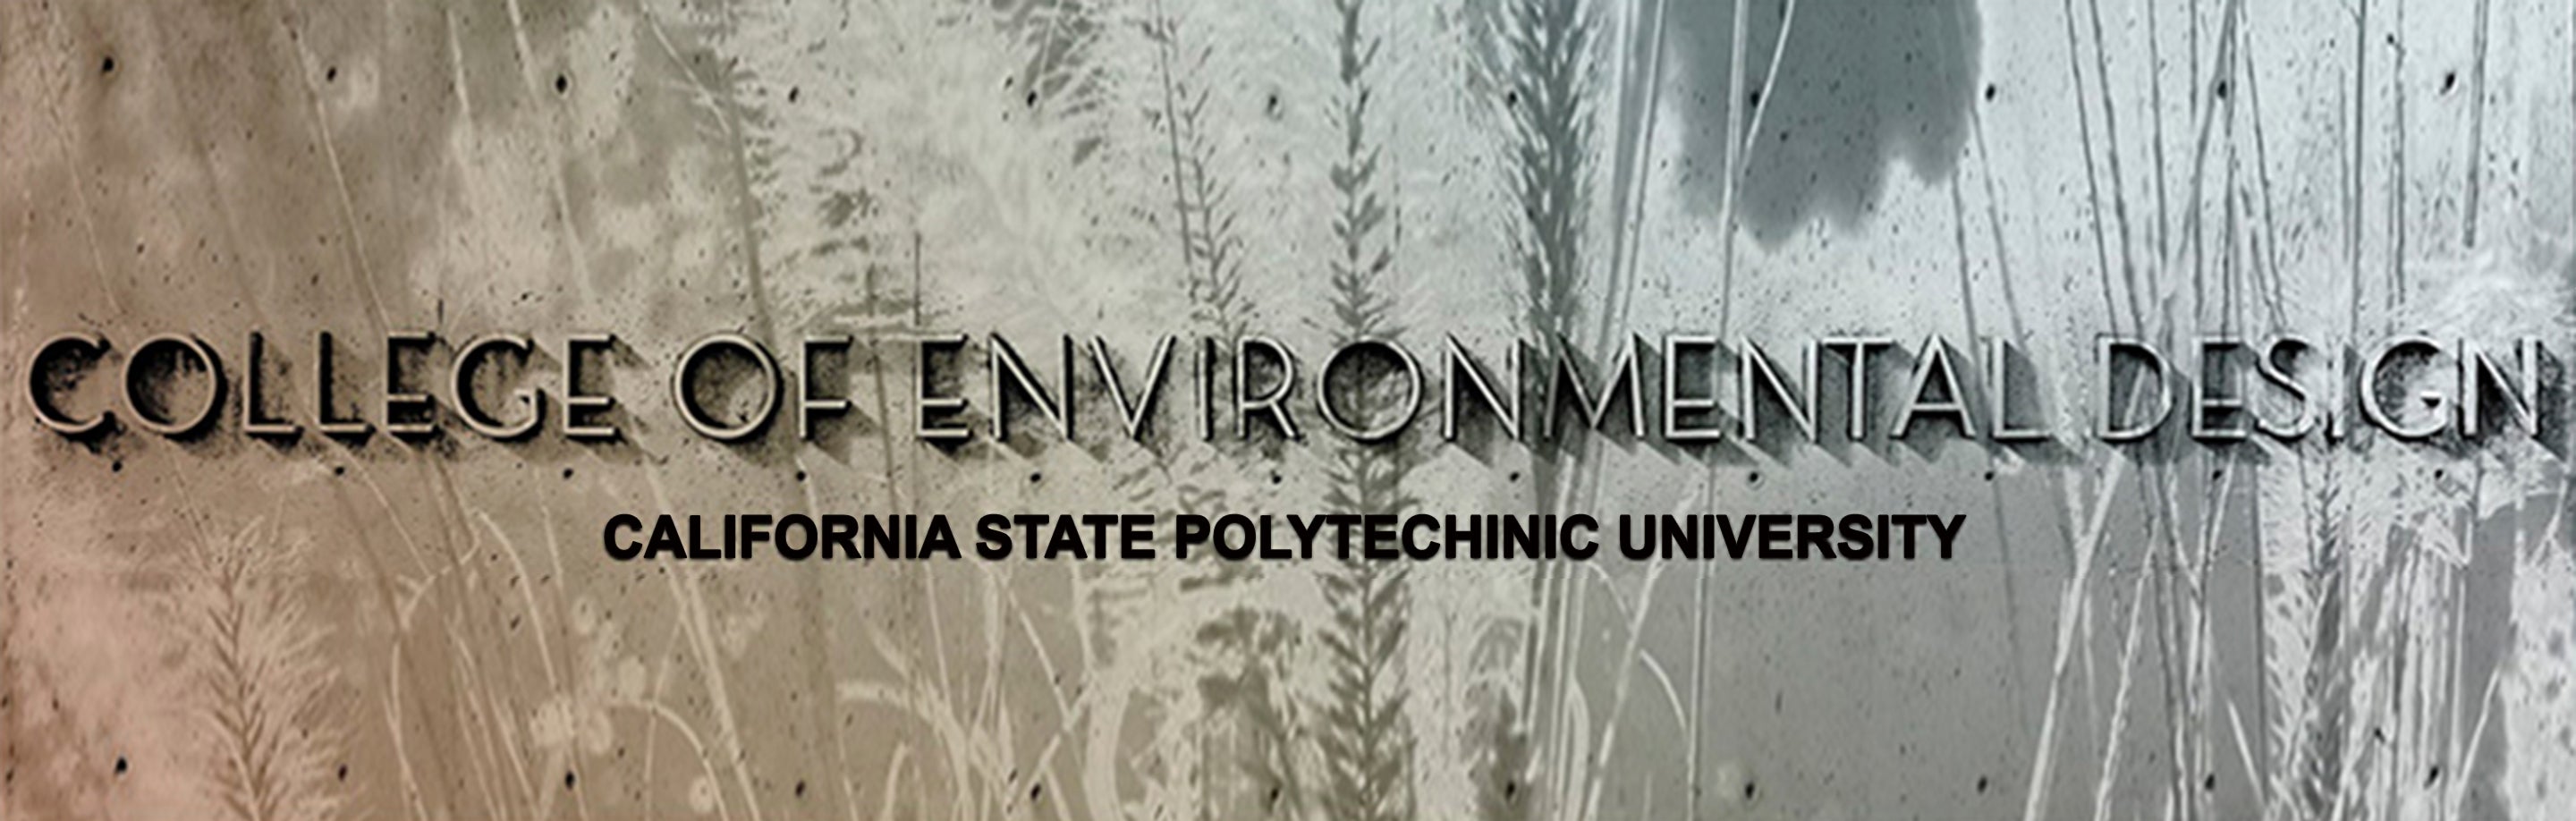 Fine art photography commission College of Environmental Design California State Polytechnic University building logo overlaid on toned black and white image long grasses and botanicals